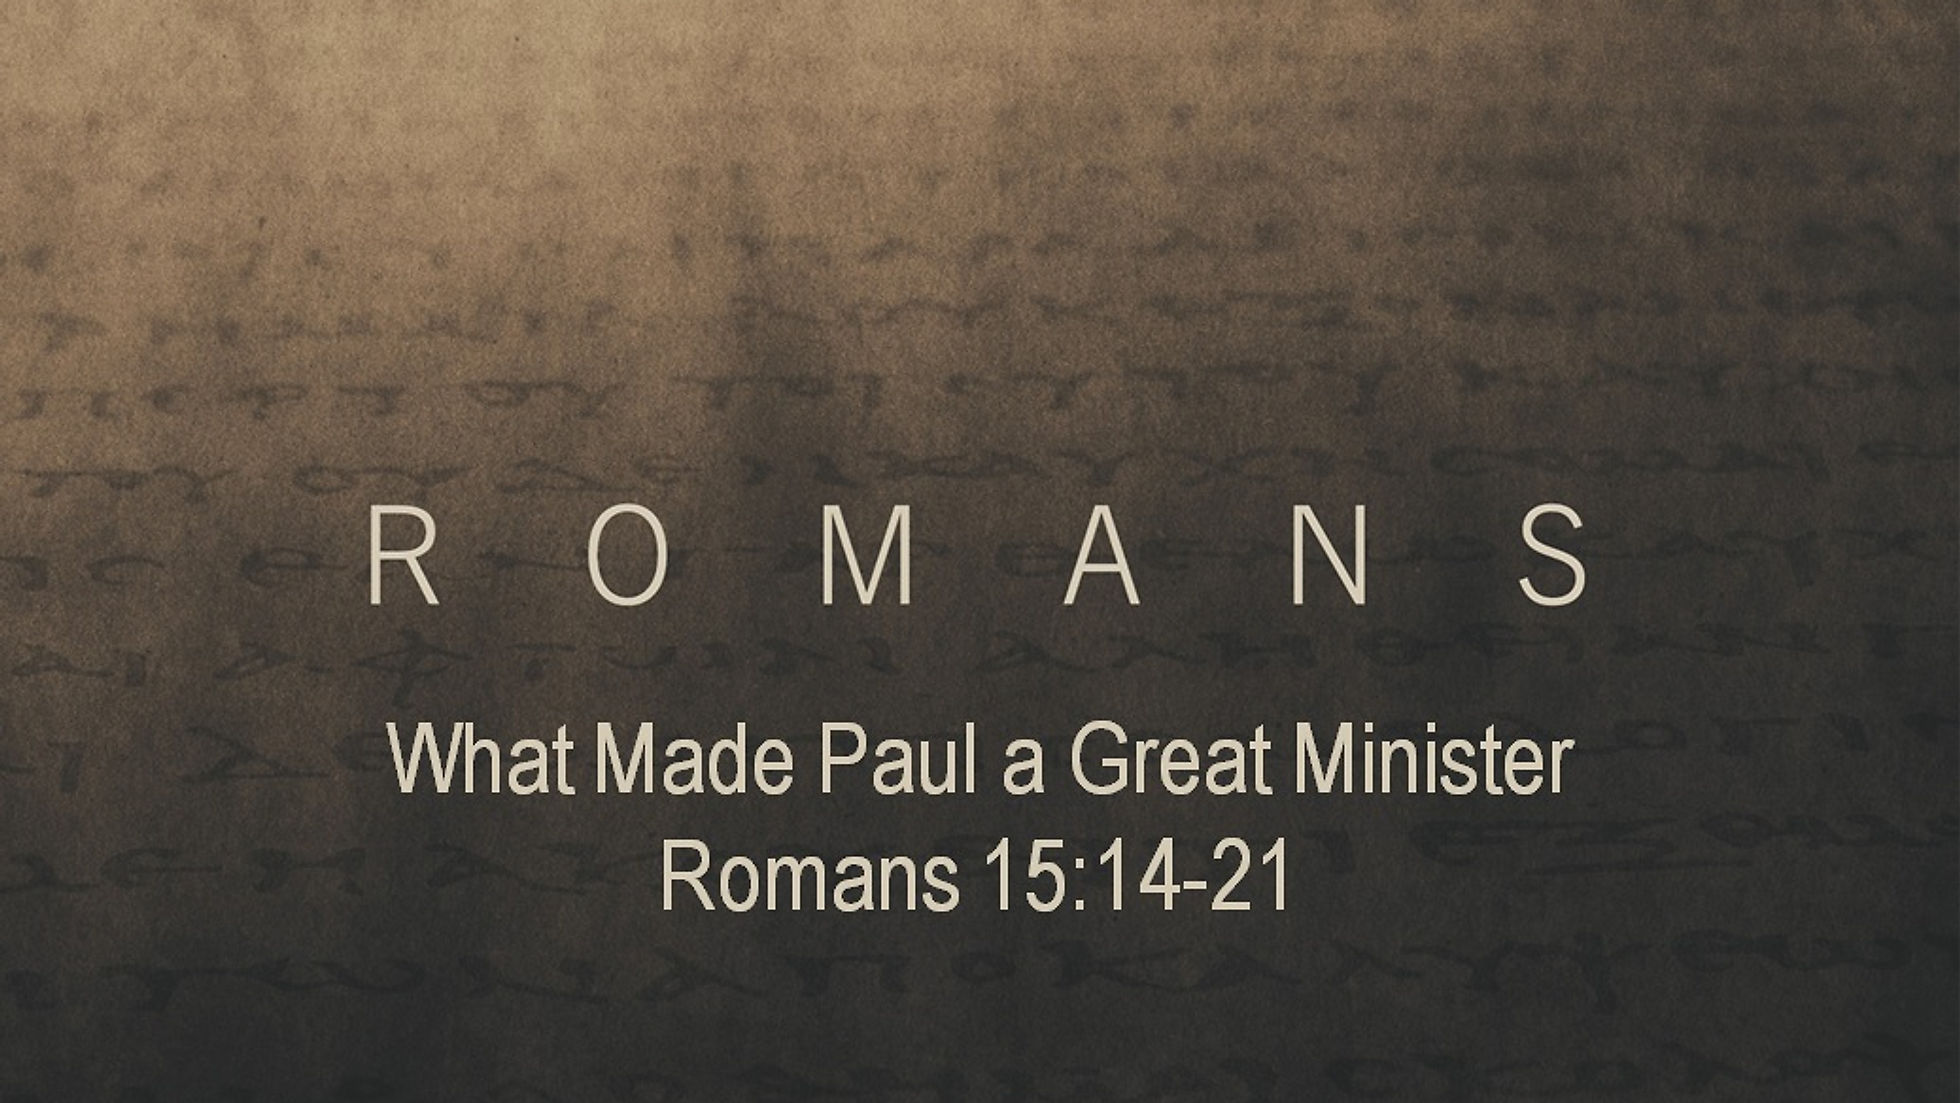 Romans: What made Paul a great minister